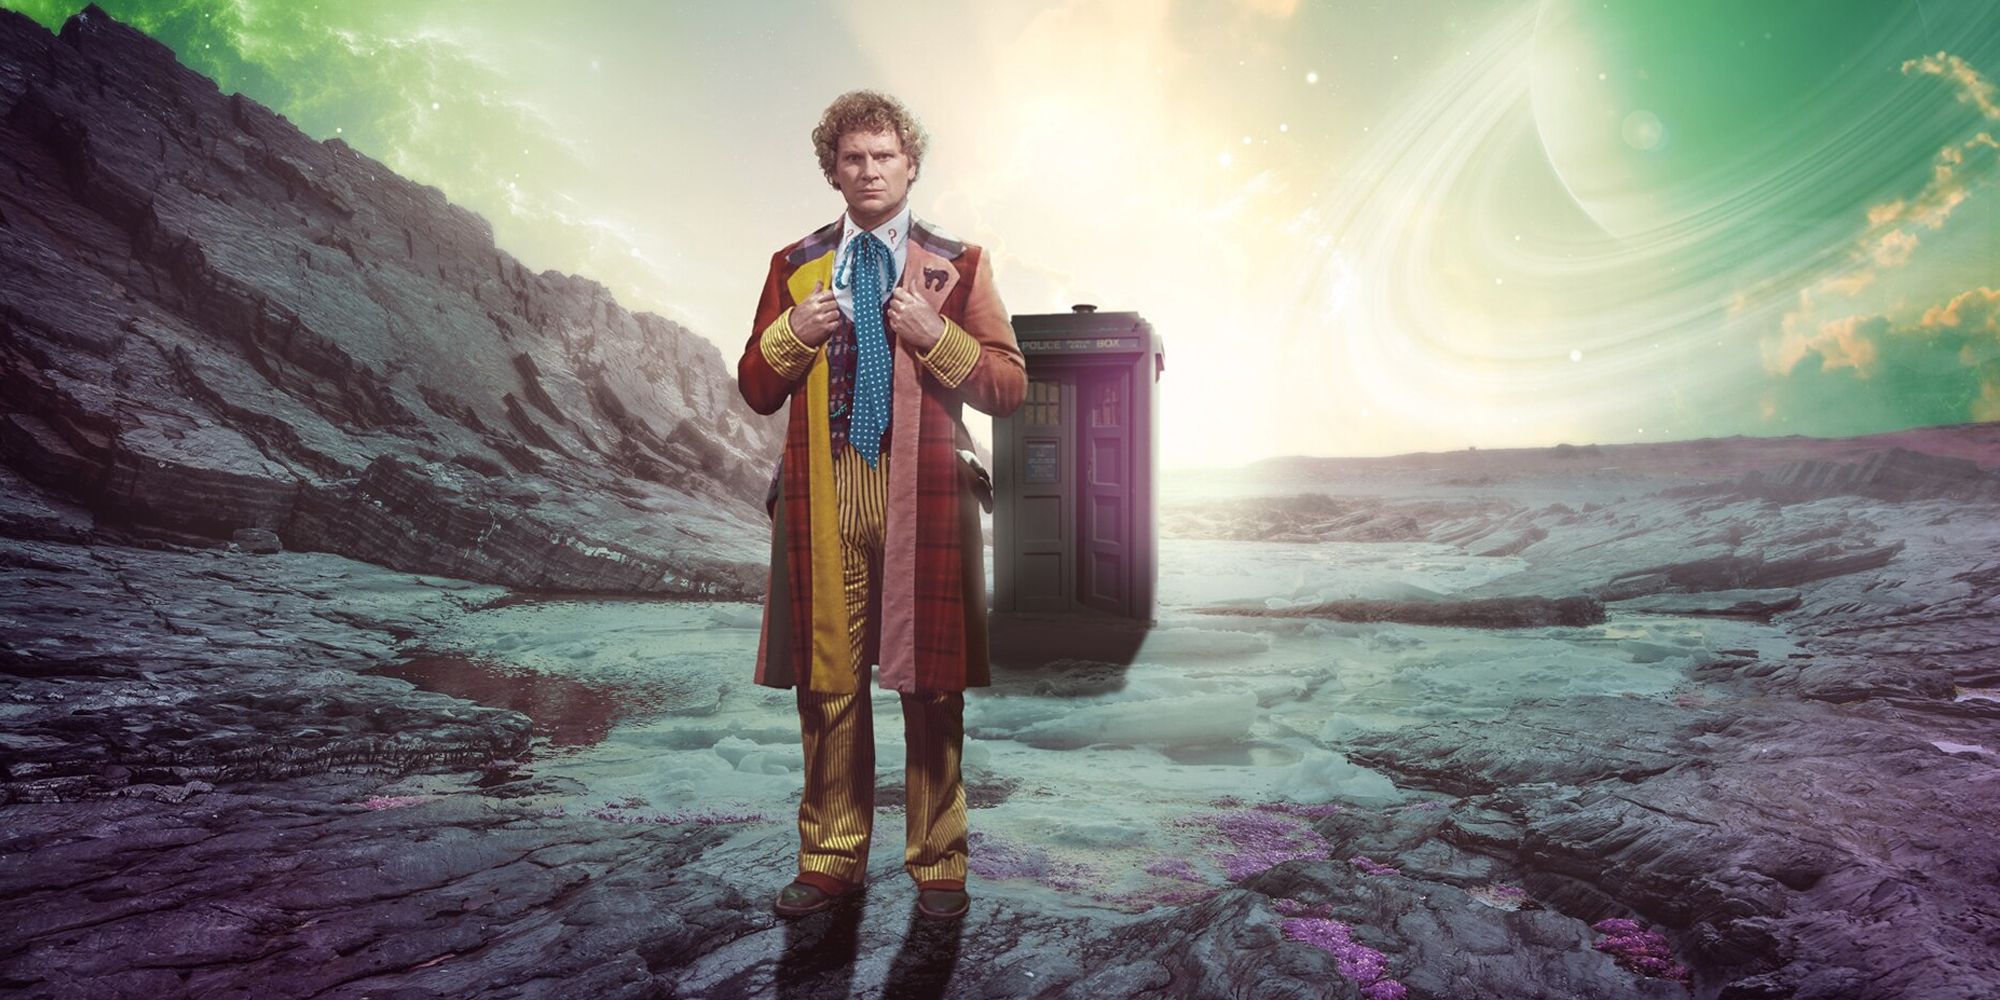 Sixth Doctor in front of his Tardis on a rocky planet with a green sky